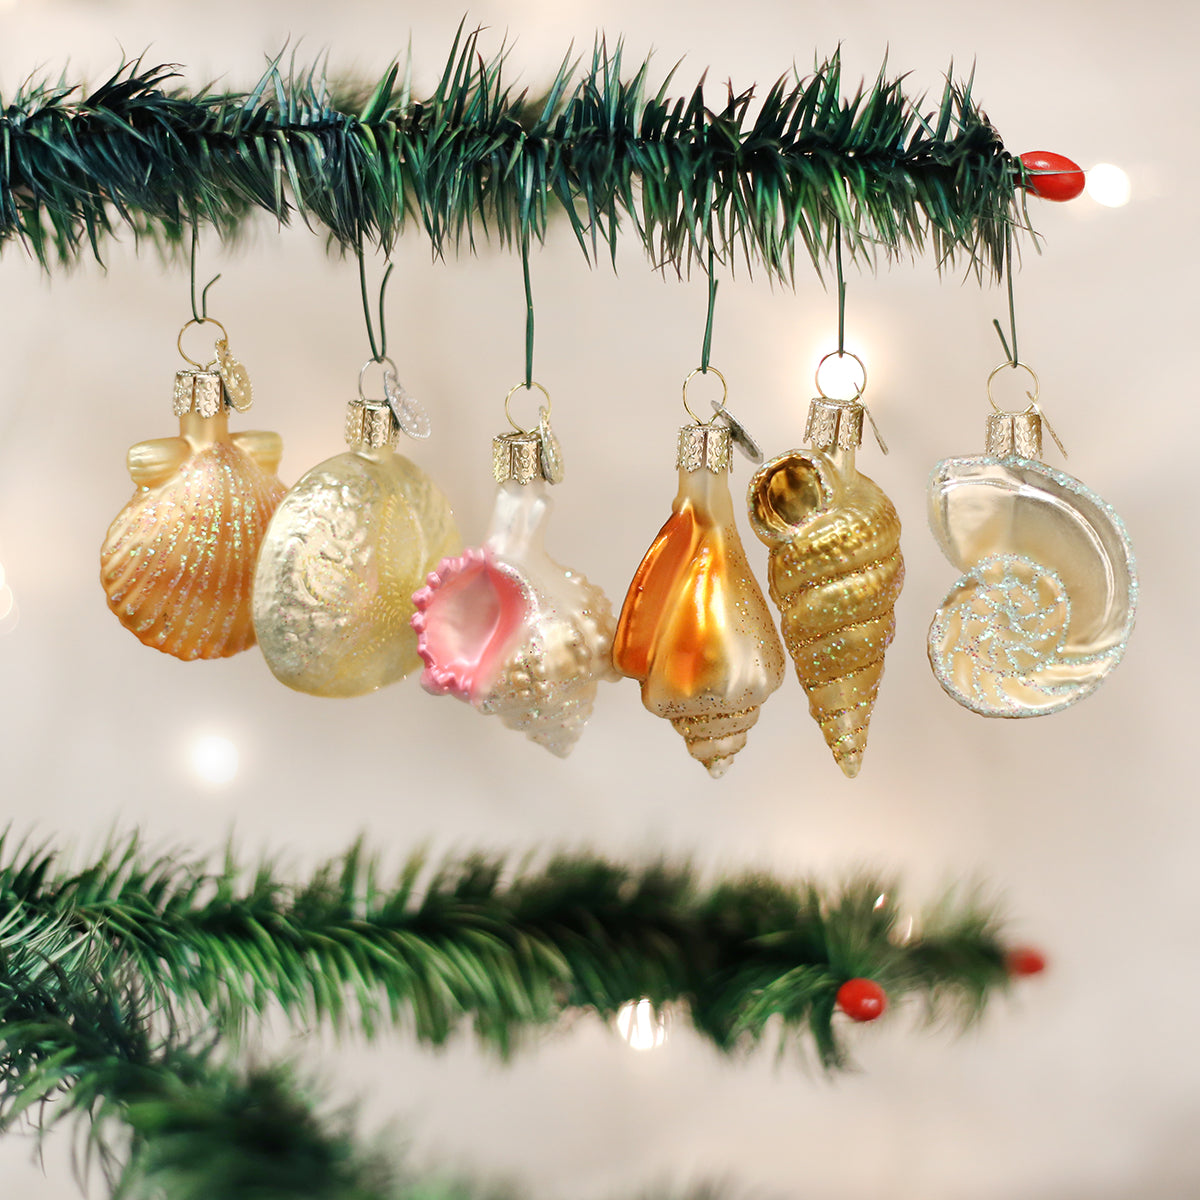 Tiny Christmas Ornaments, 8 pieces with Hooks, Miniature Glass